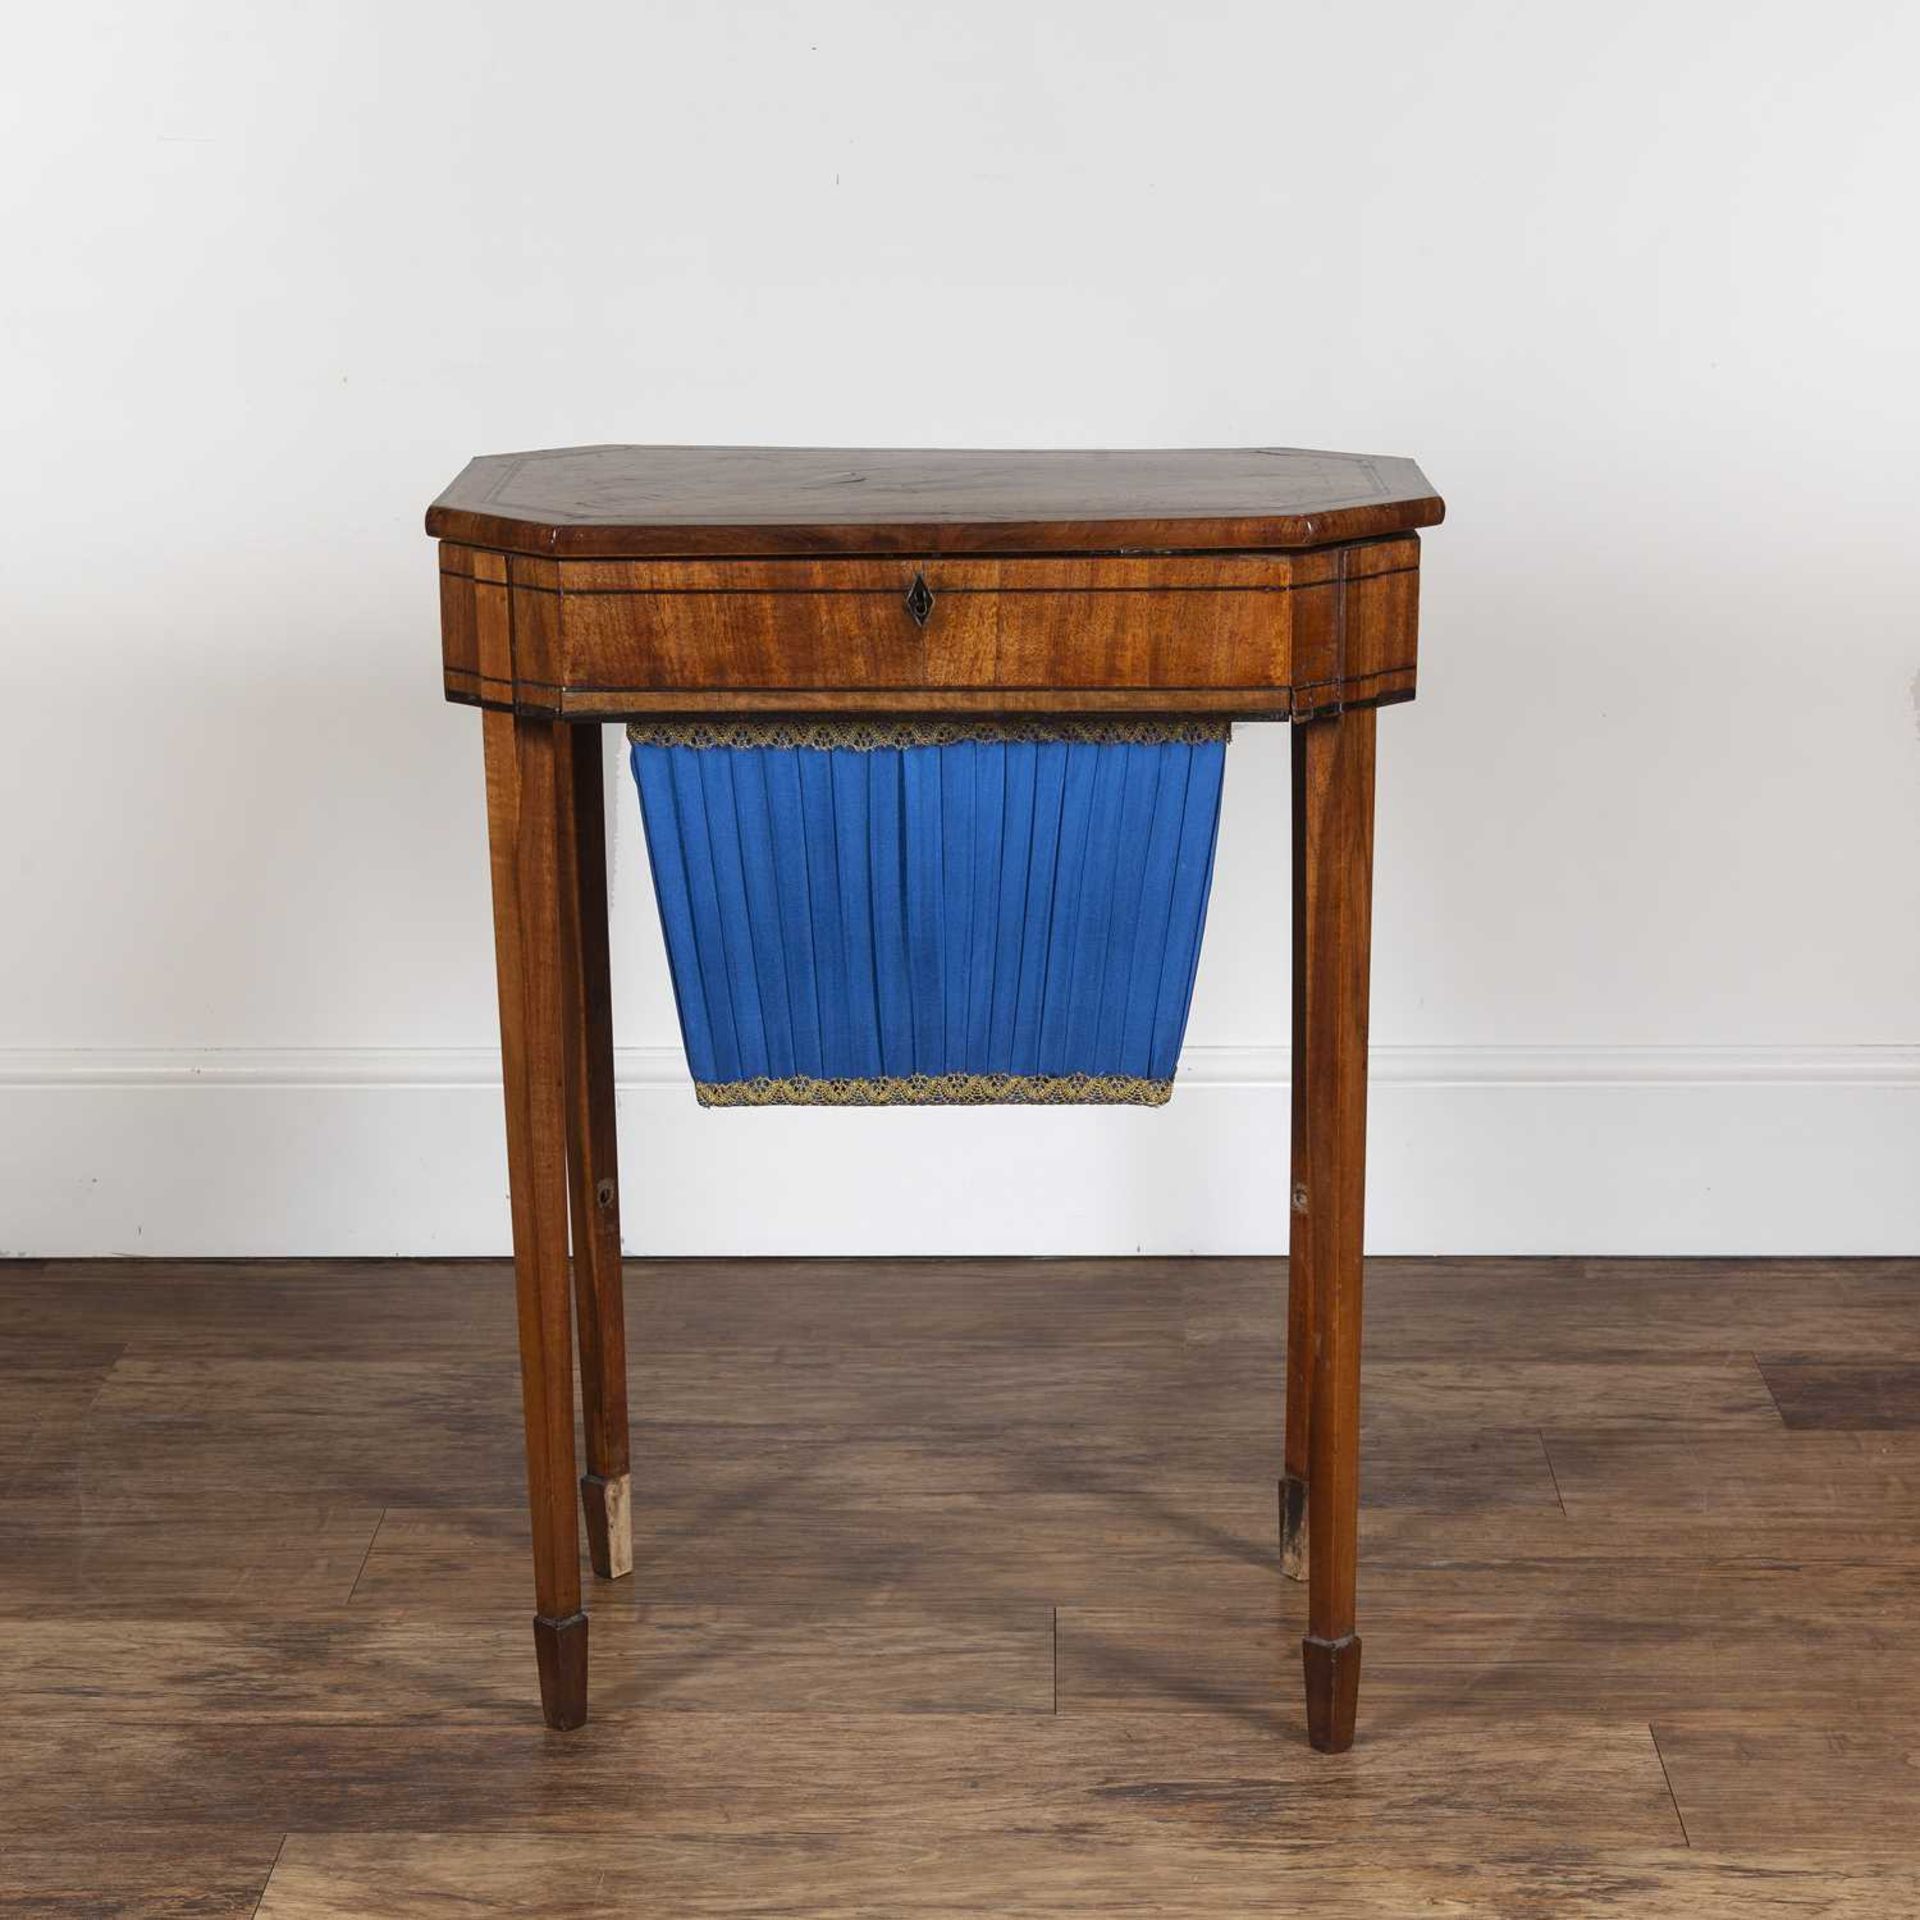 Mahogany sewing table 19th Century, a lift up lid revealing a fitted interior, above a pull-out